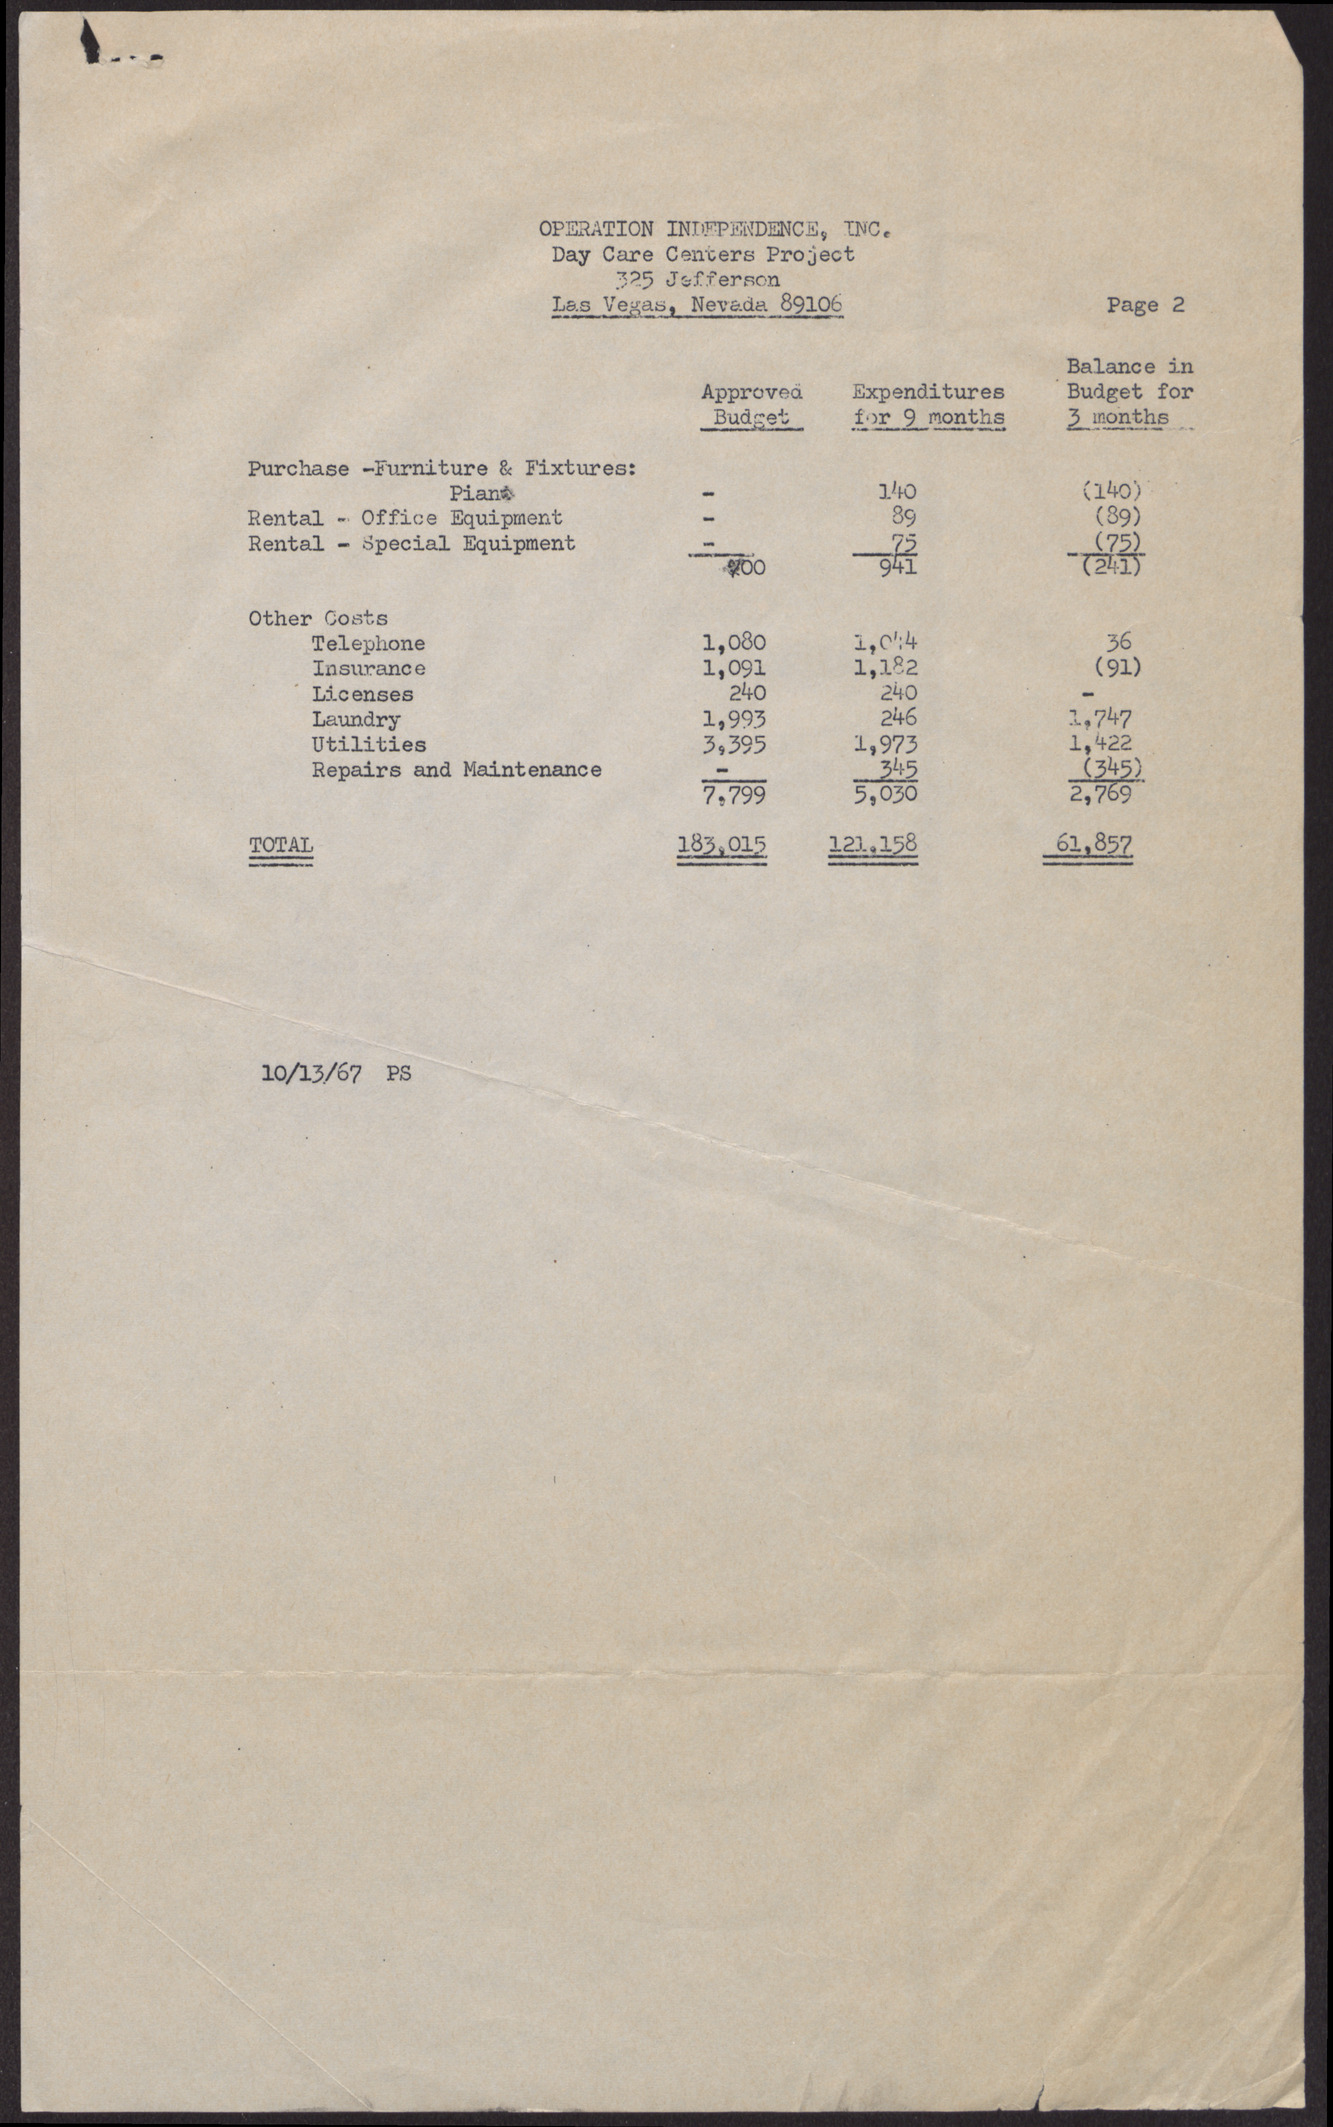 Operation Independence Incorporated Day Care Centers Project Statement of Budgeted and Actual Expenditures (2 pages), January 1 to September 30, 1967, page 2